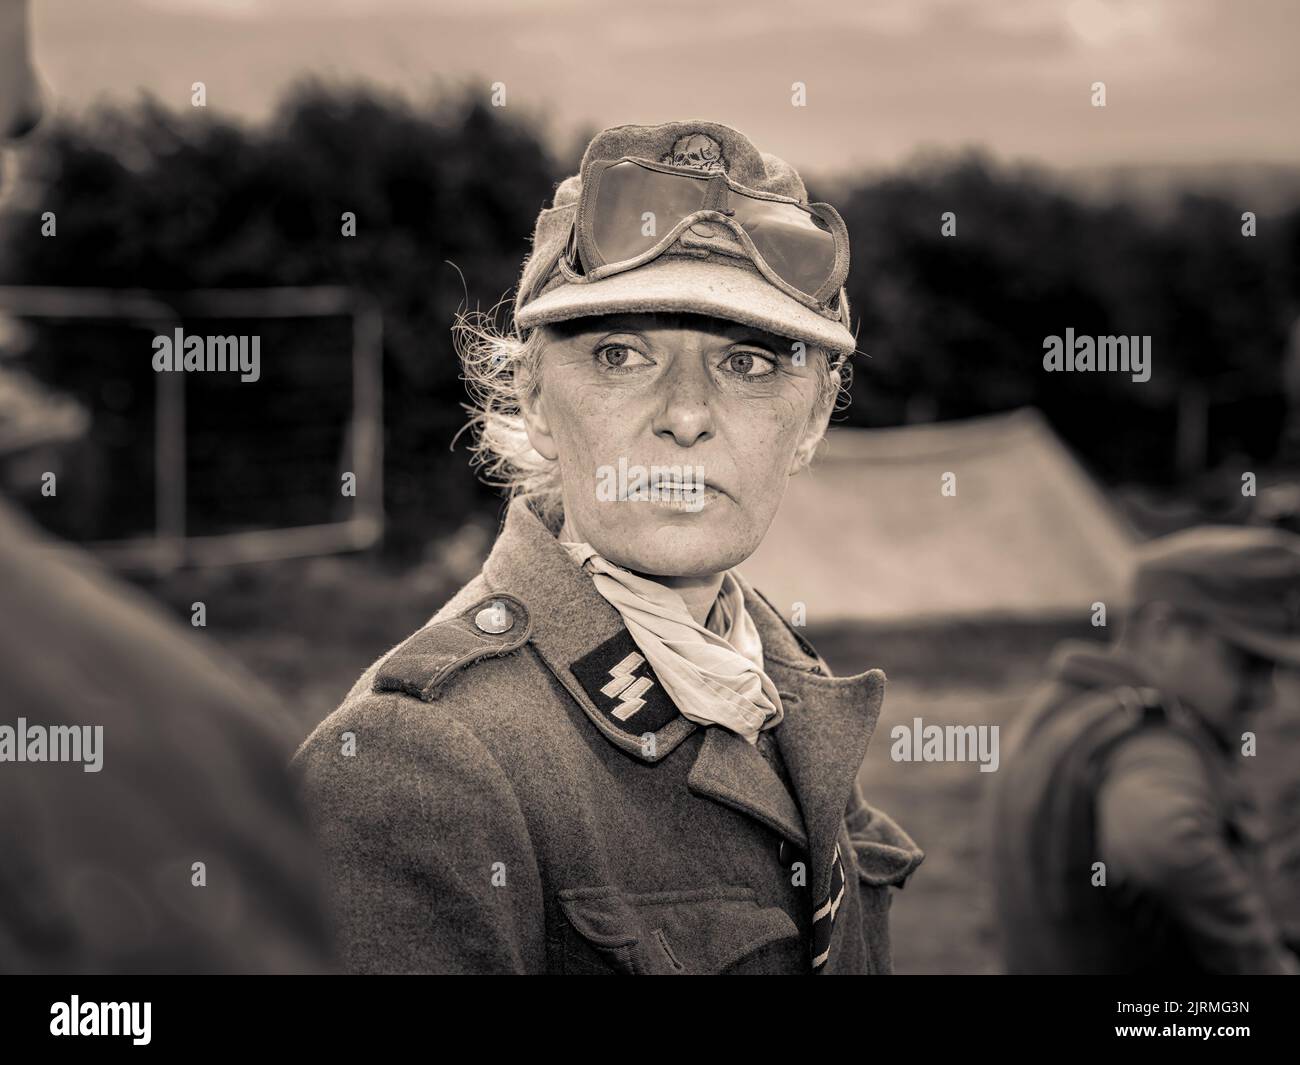 A closeup of a woman reenactor soldier in a military uniform during WW2. Historical reenactment Stock Photo